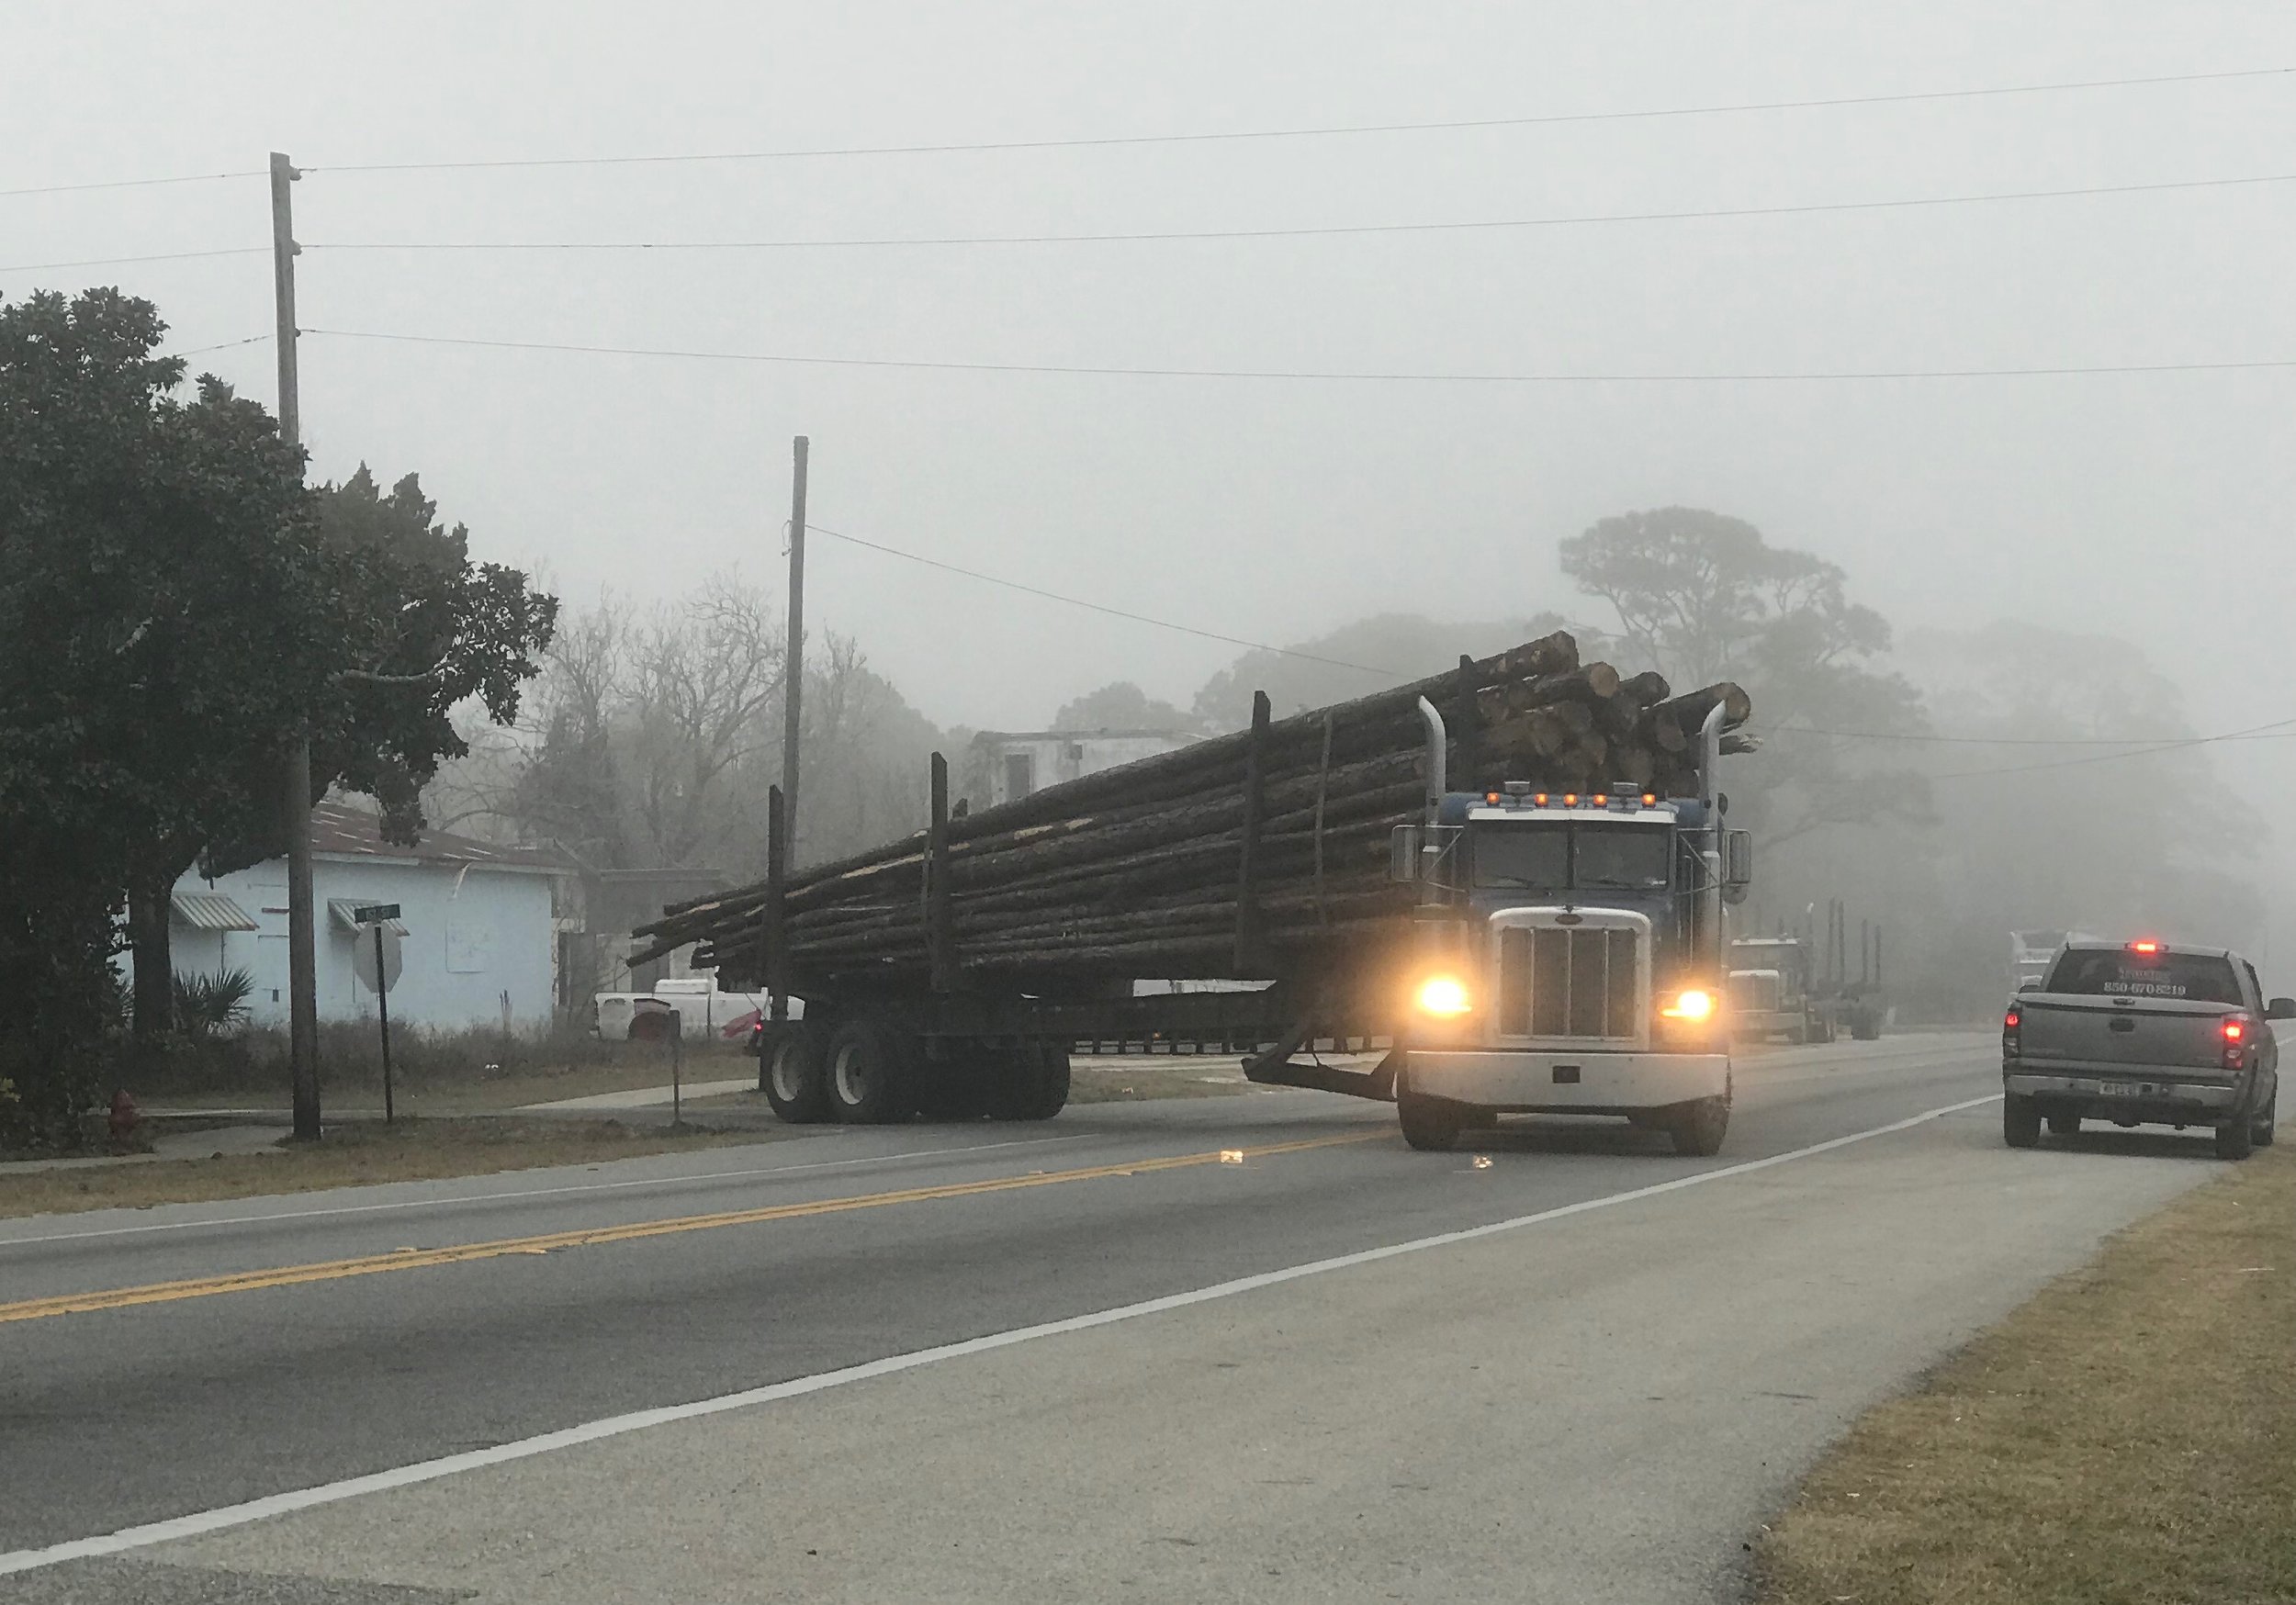  Timber trucks are a frequent sight on Rte. 98. 